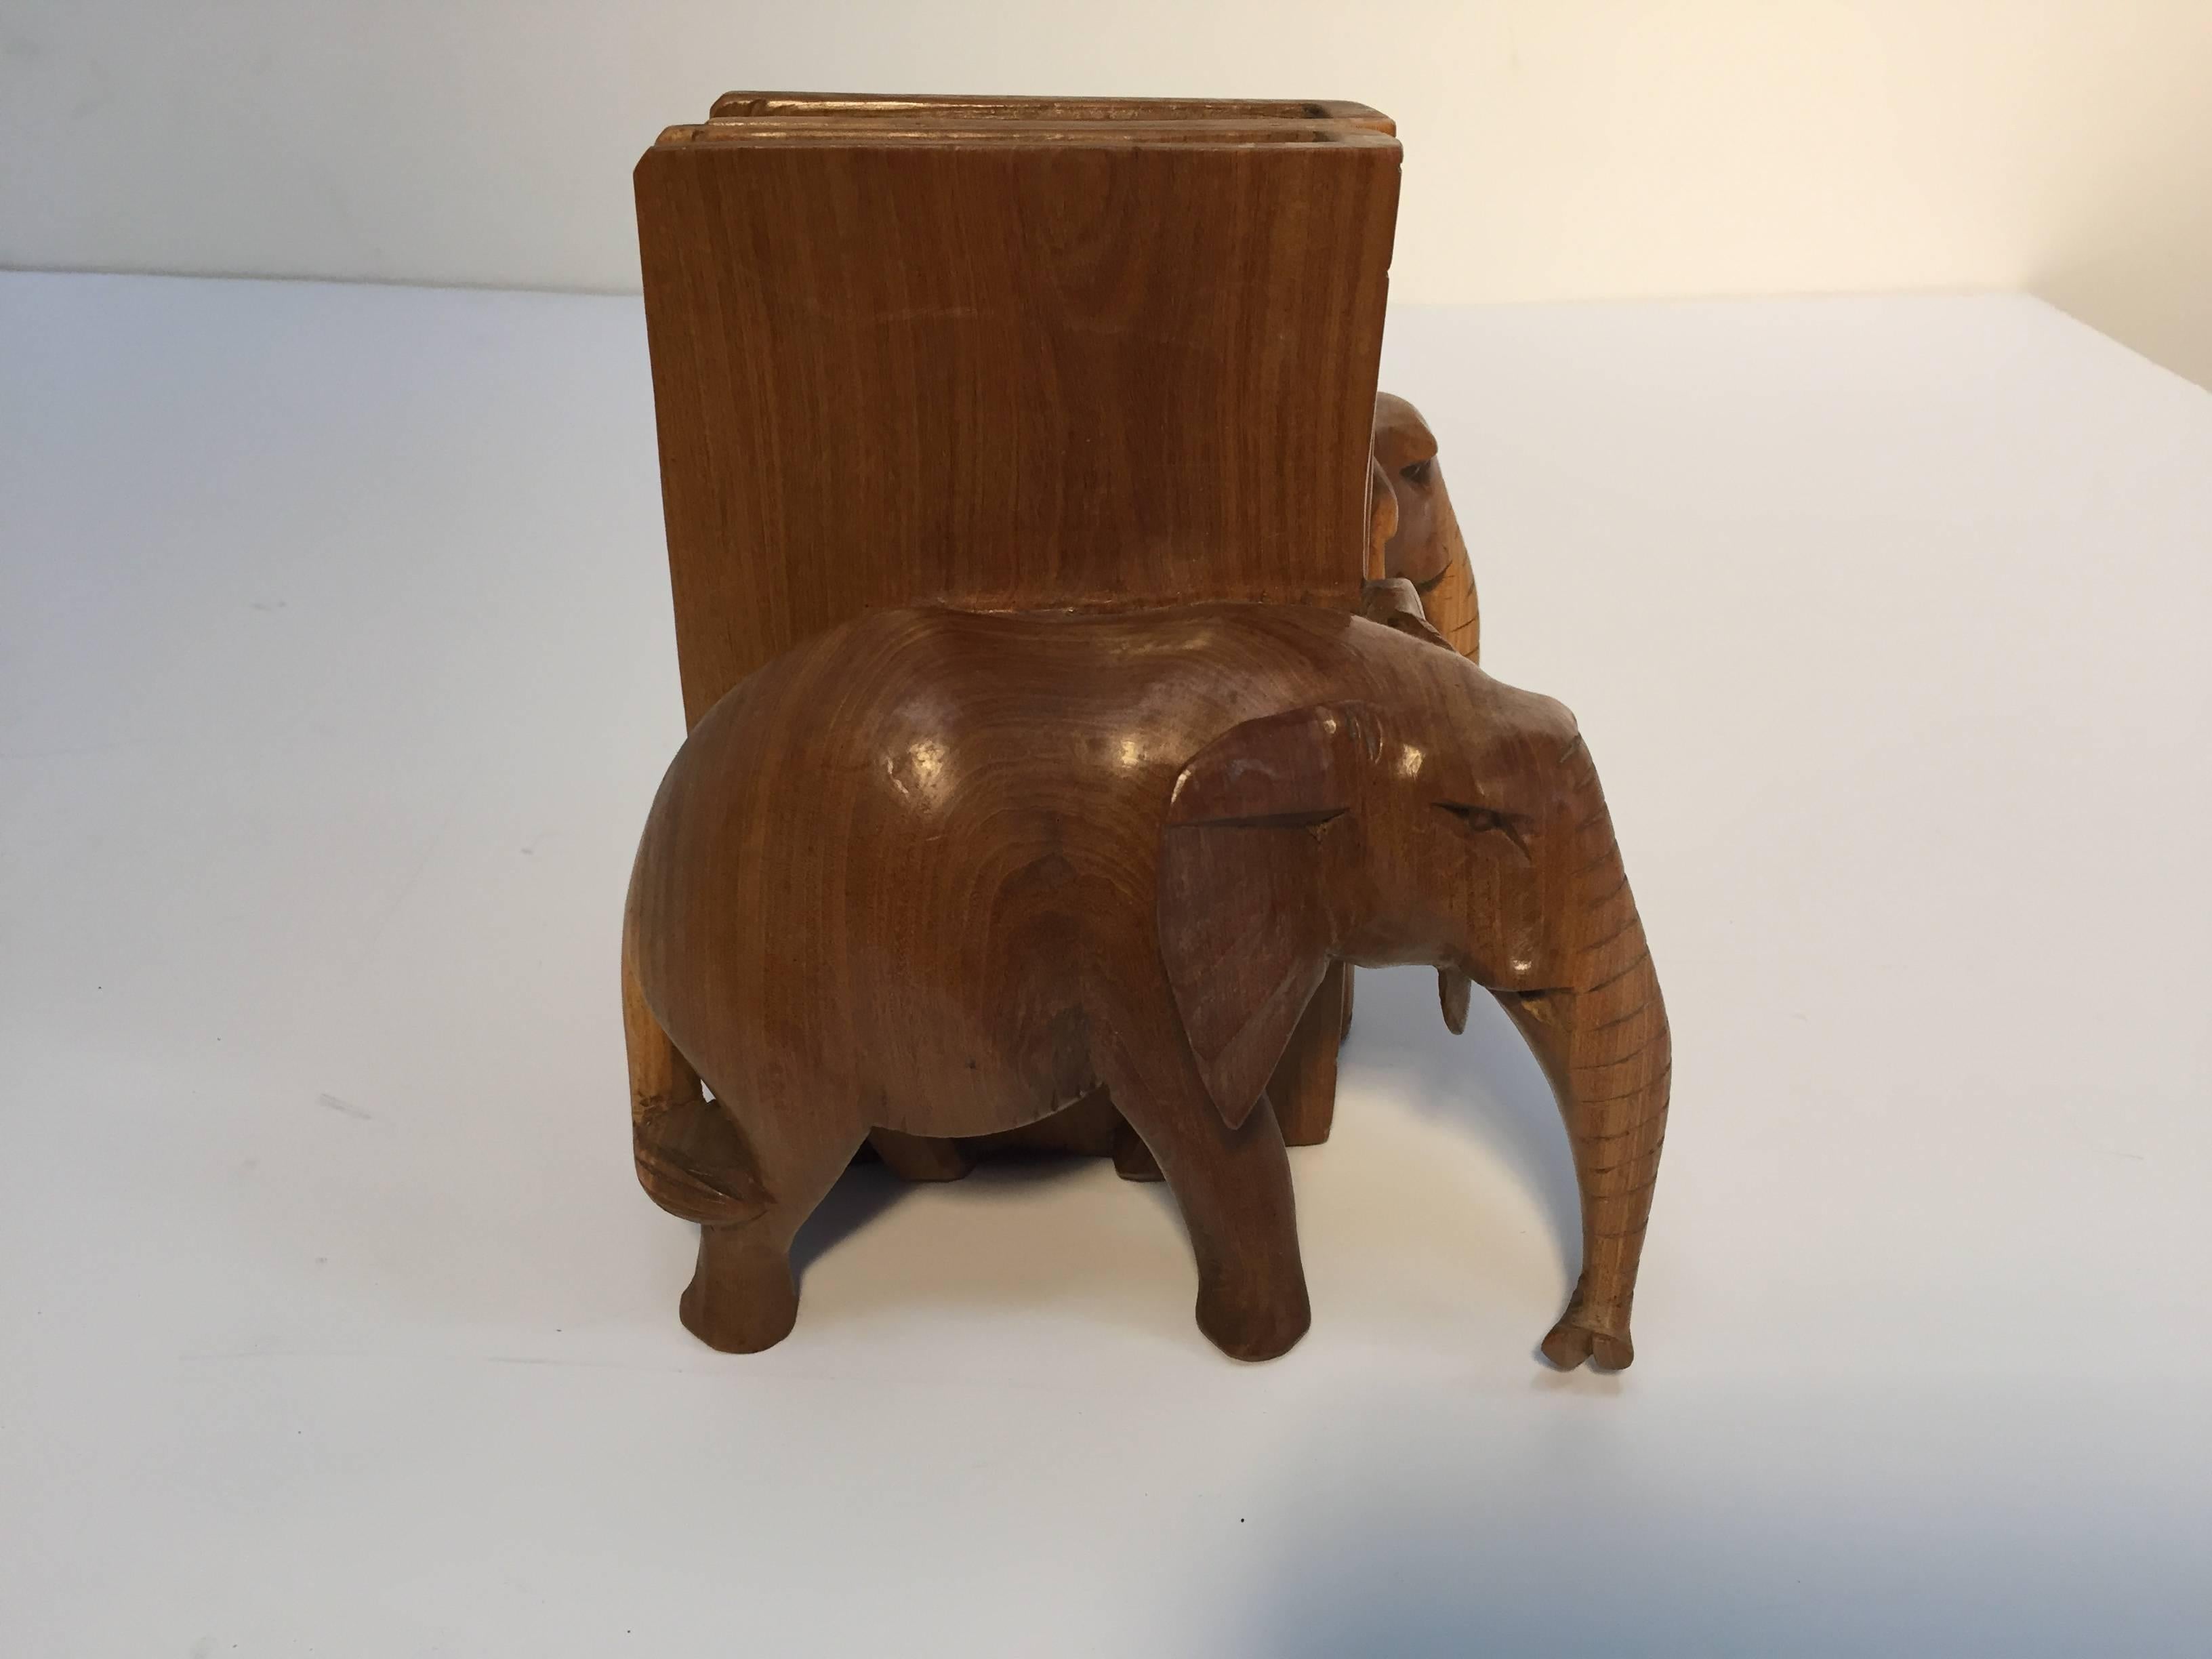 Nice pair of hand-carved wooden elephant bookends.
Elephant animal sculptures book ends handcrafted in Rajasthan, India.
Each book end is: 7.75